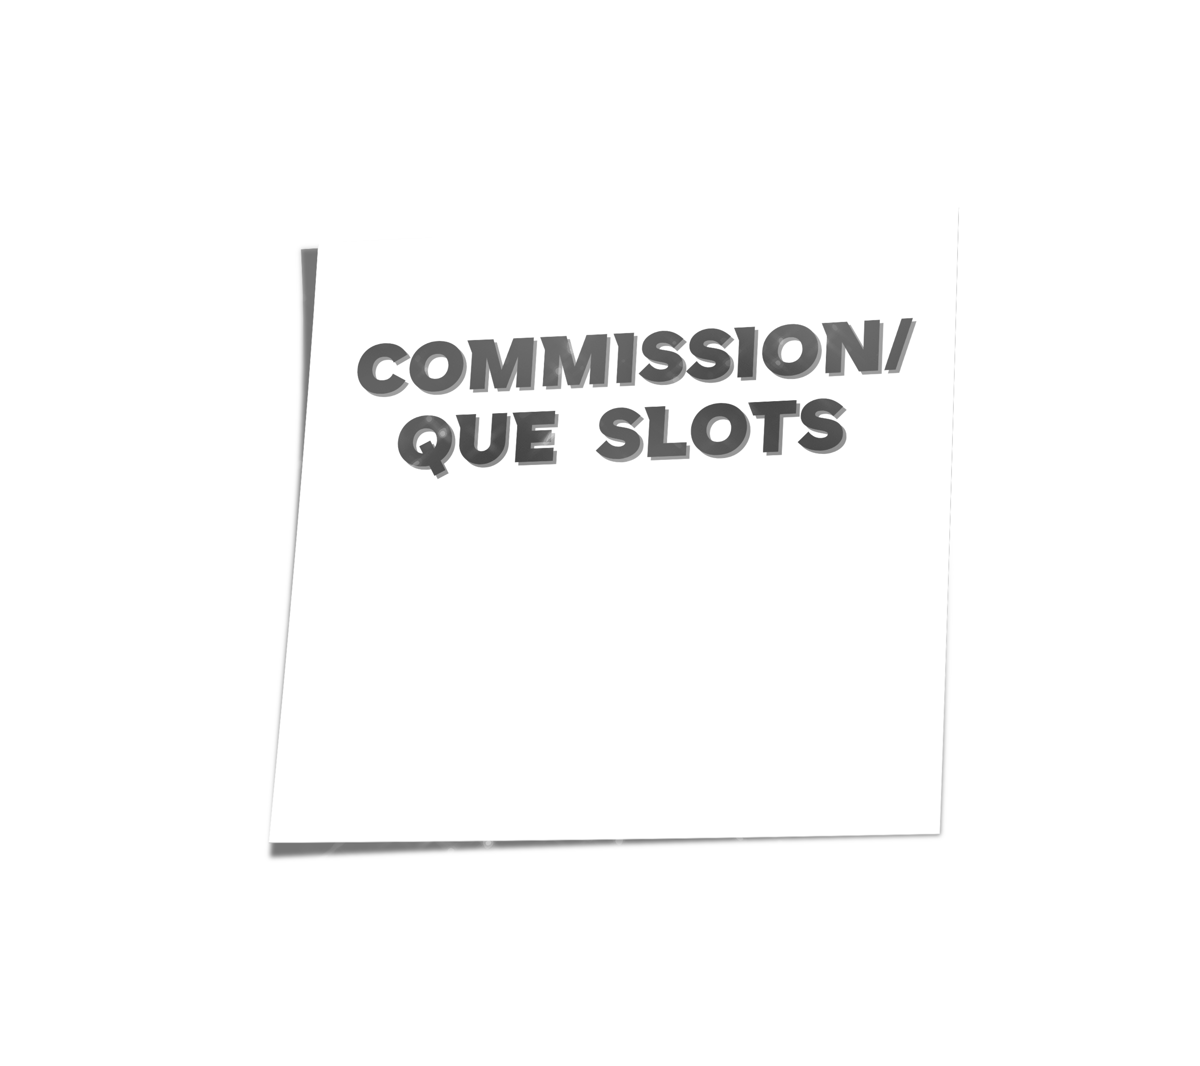 Image of Commission slots